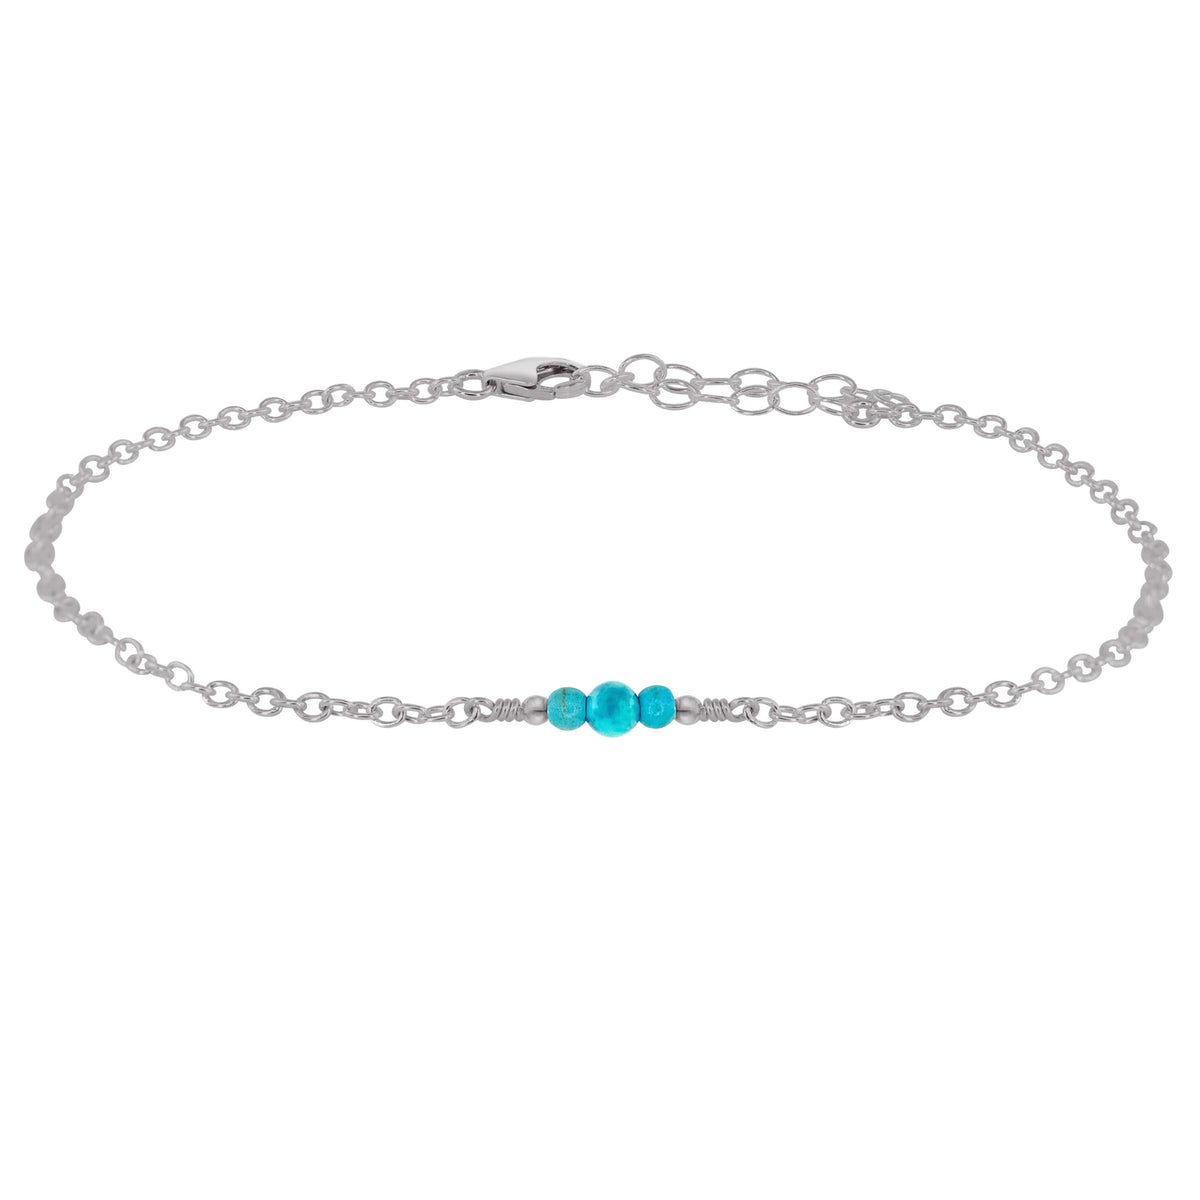 Dainty Anklet - Turquoise - Stainless Steel - Luna Tide Handmade Jewellery